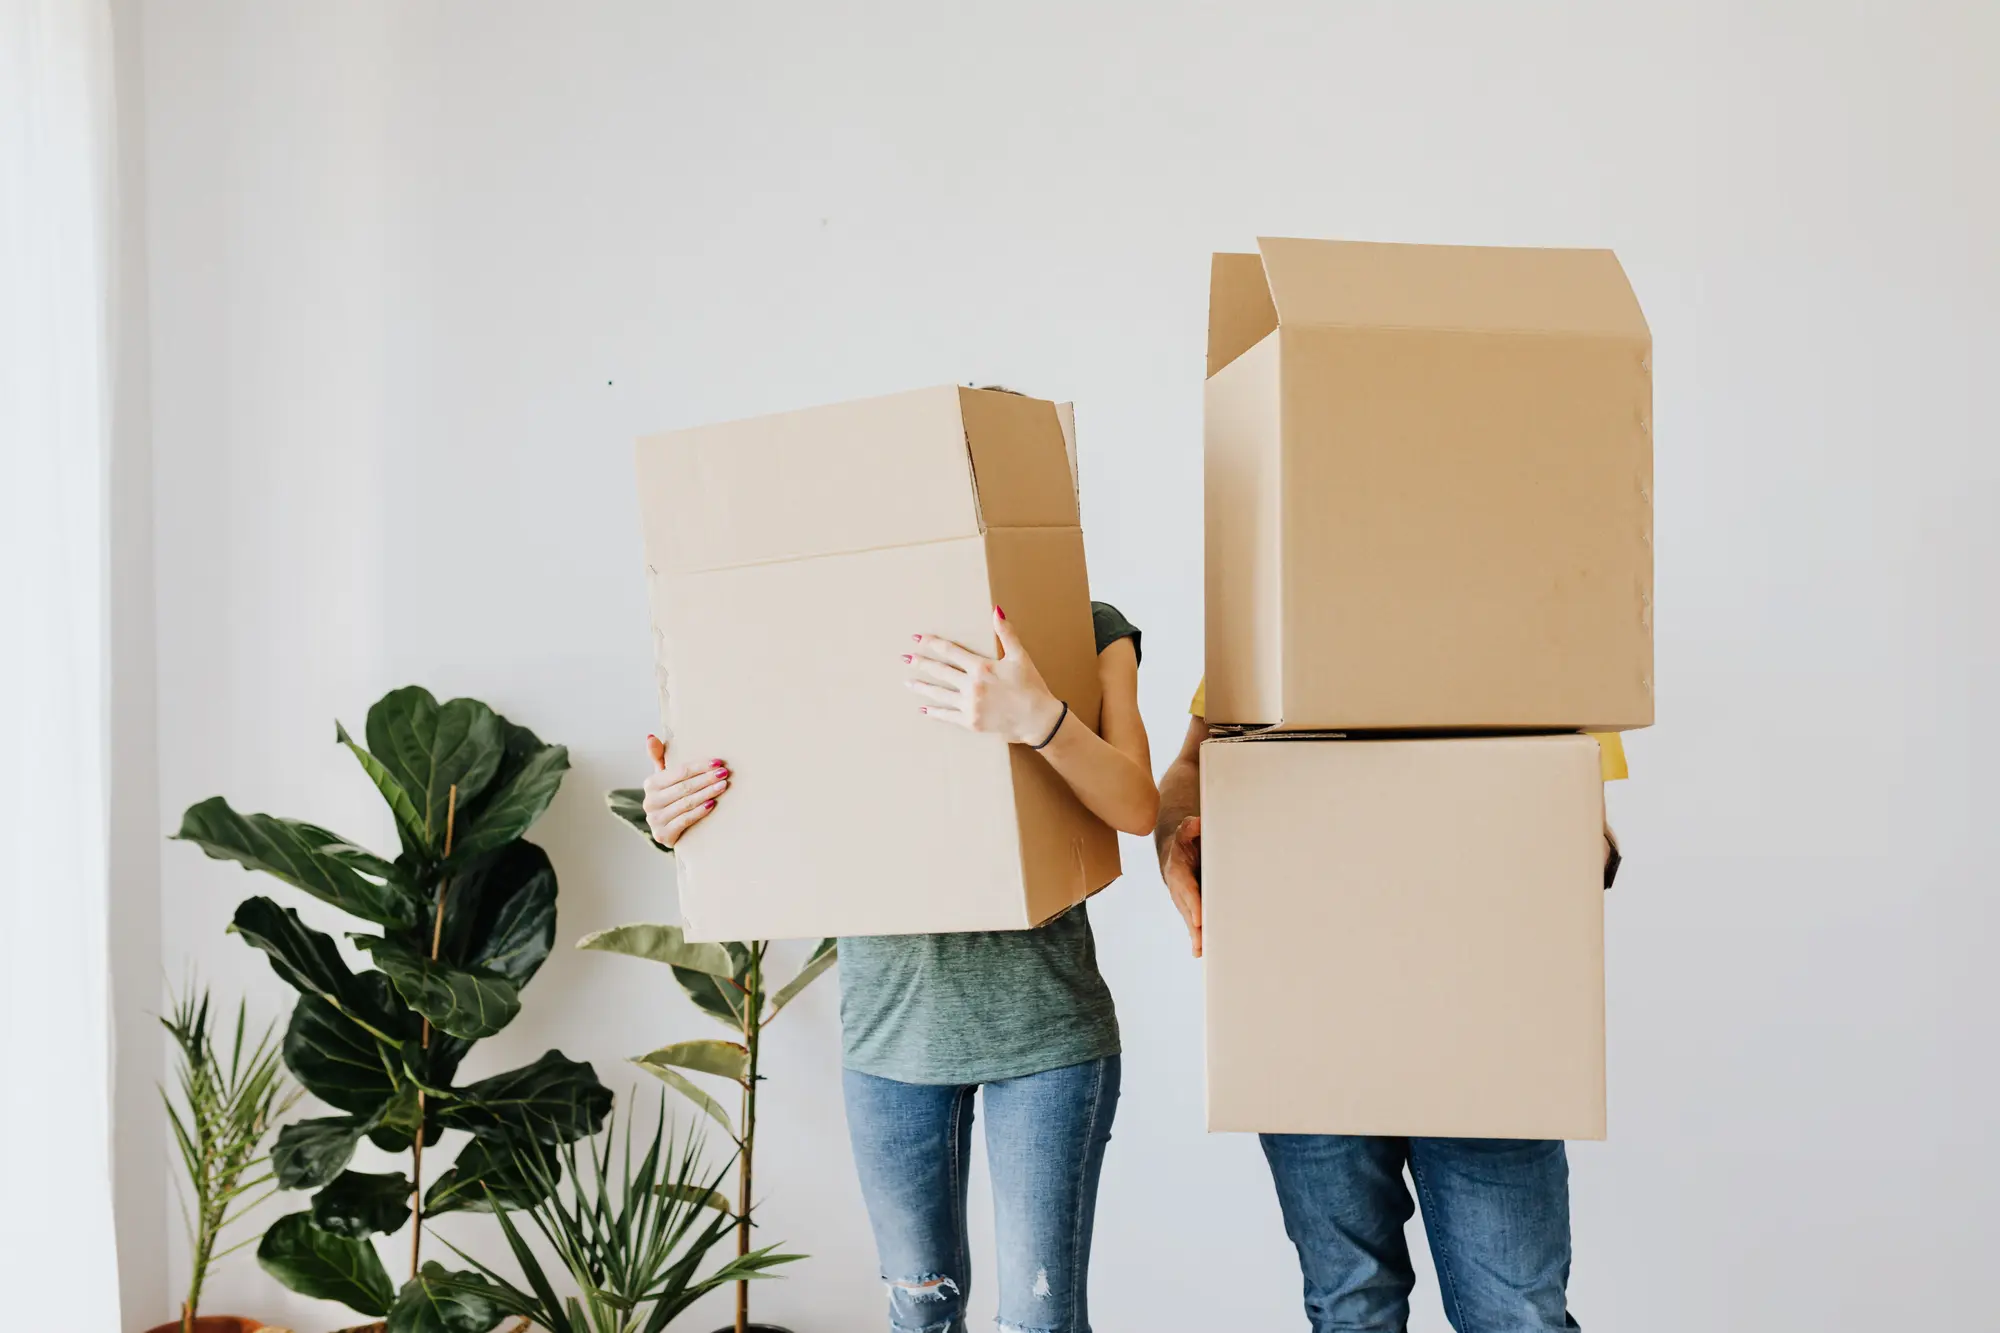 Local movers West Chester | relocation services in Chester County, relocation company in chester county and west chester pa, west chester pa house services